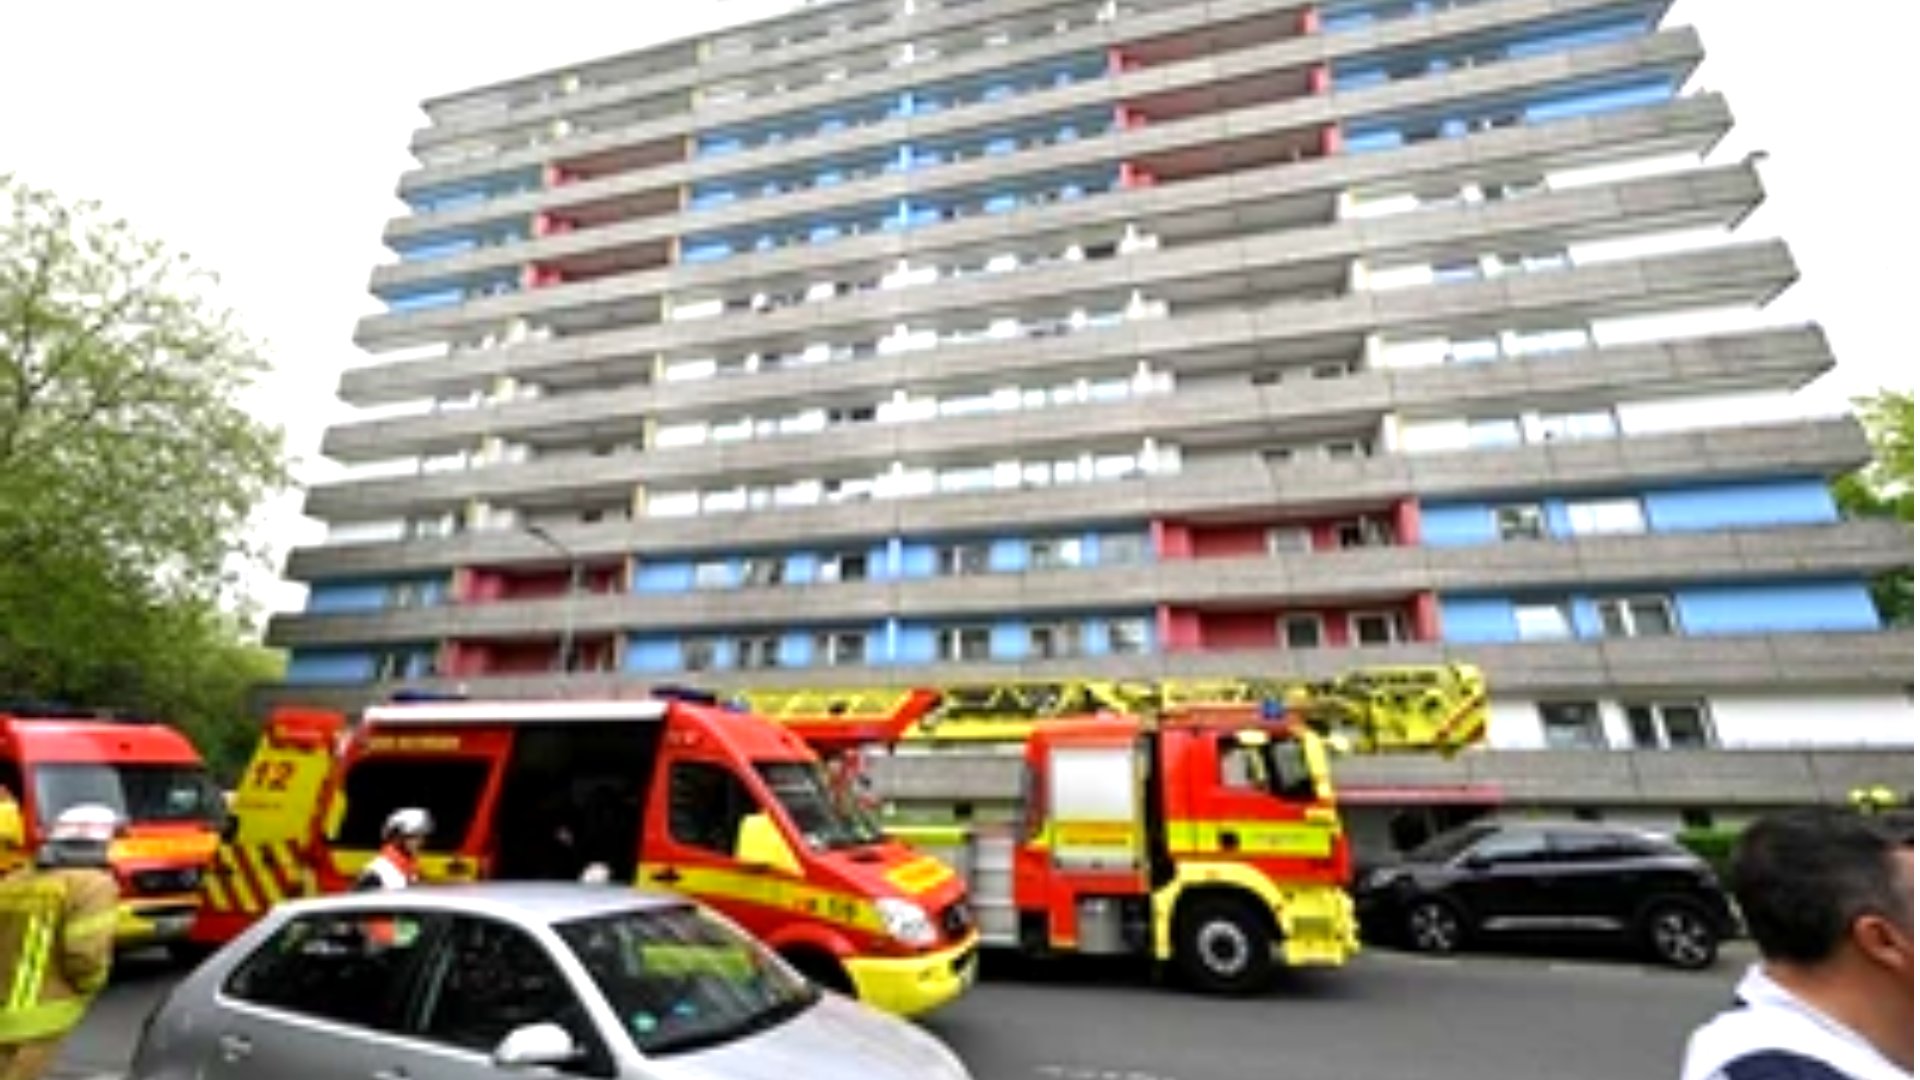 Germany: Blast at apartment building injures police, firefighters in Ratingen